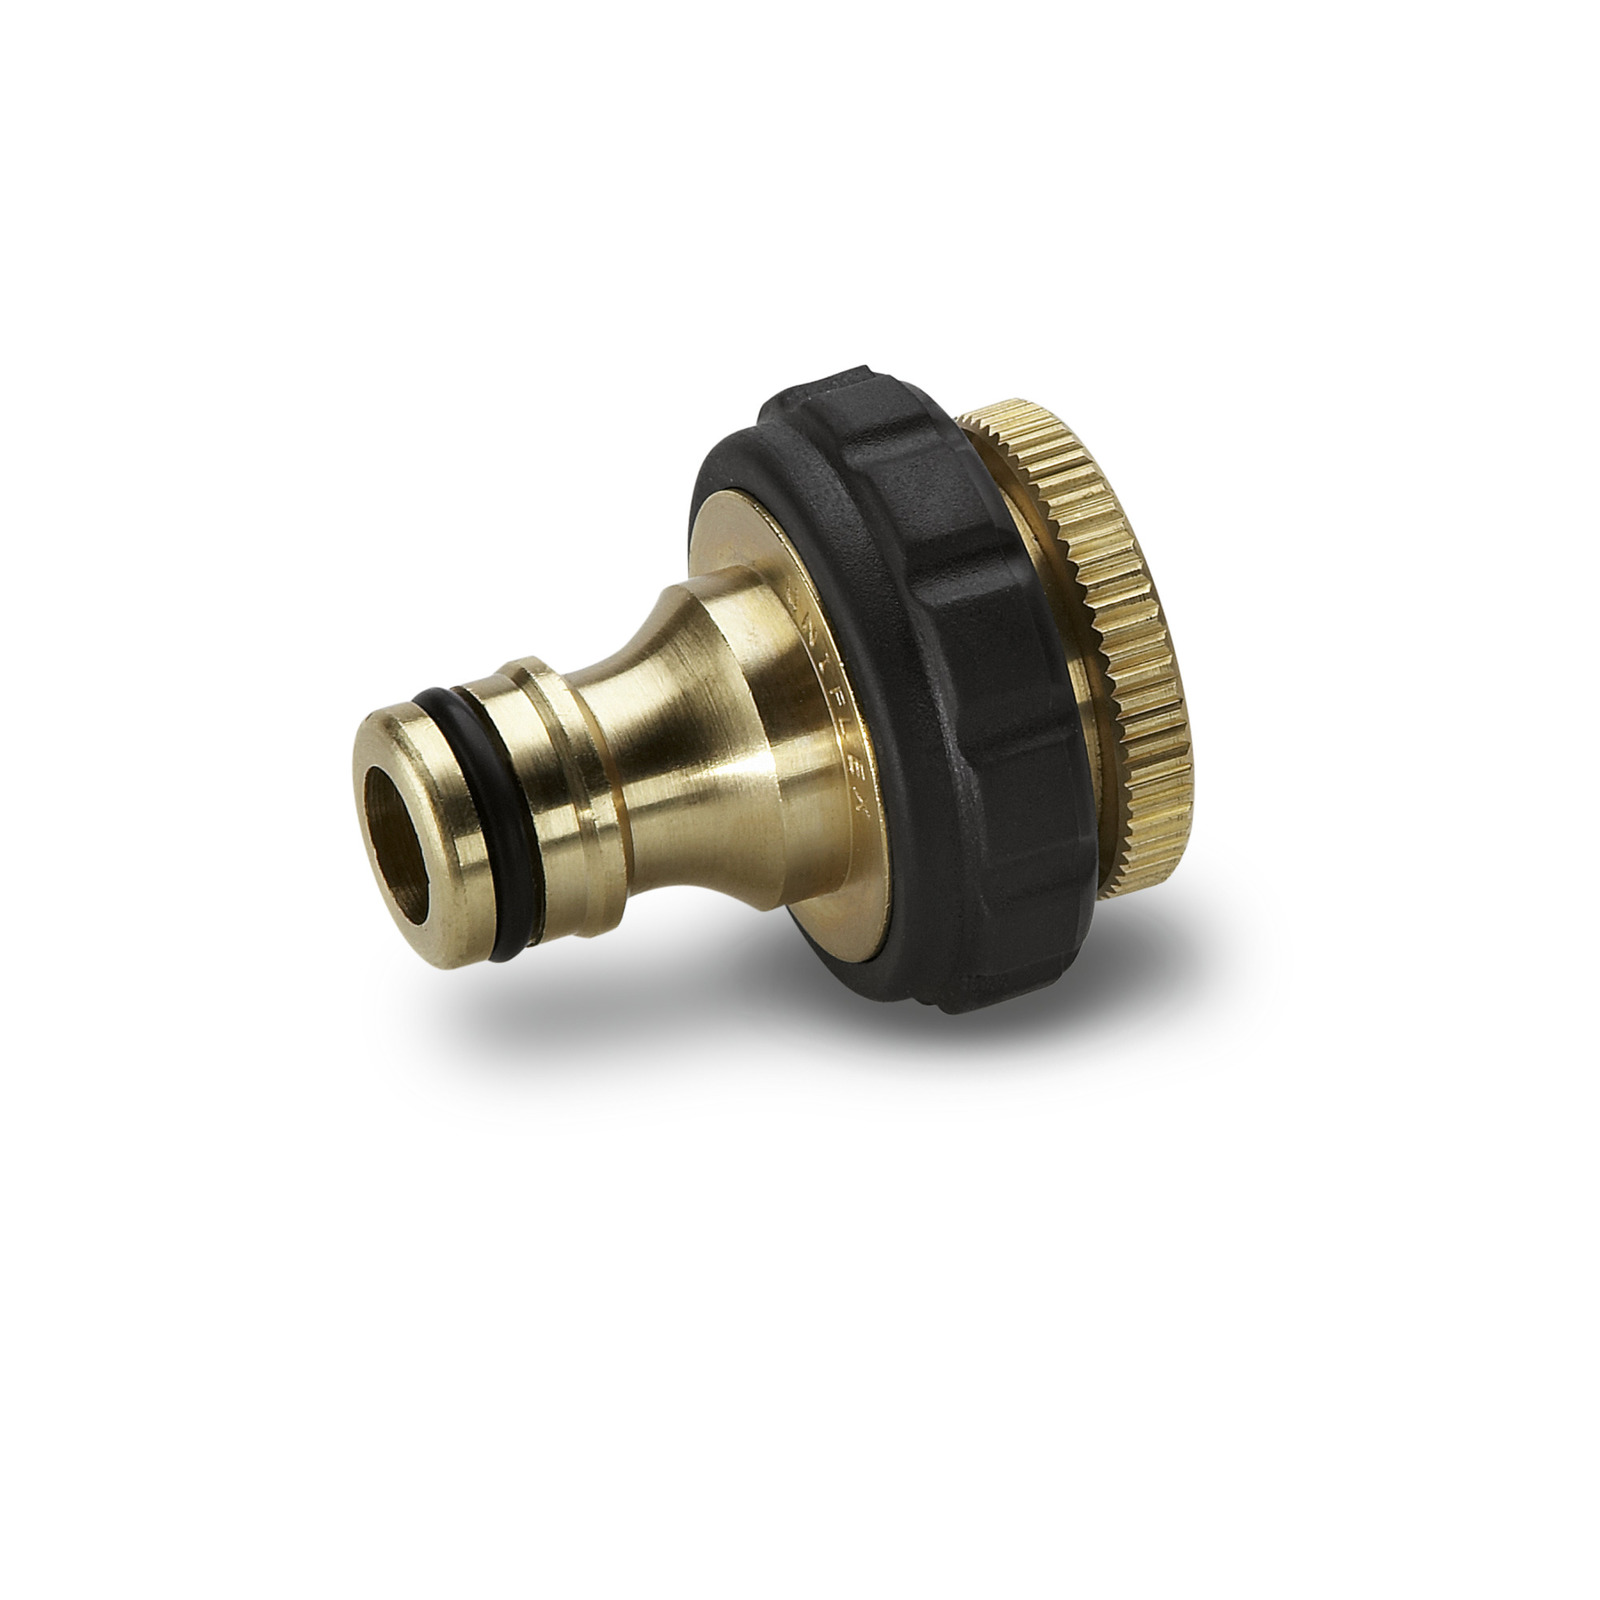 Brass Tap Connector 3/4" Thread with 1/2" Thread Reducer - 26450130